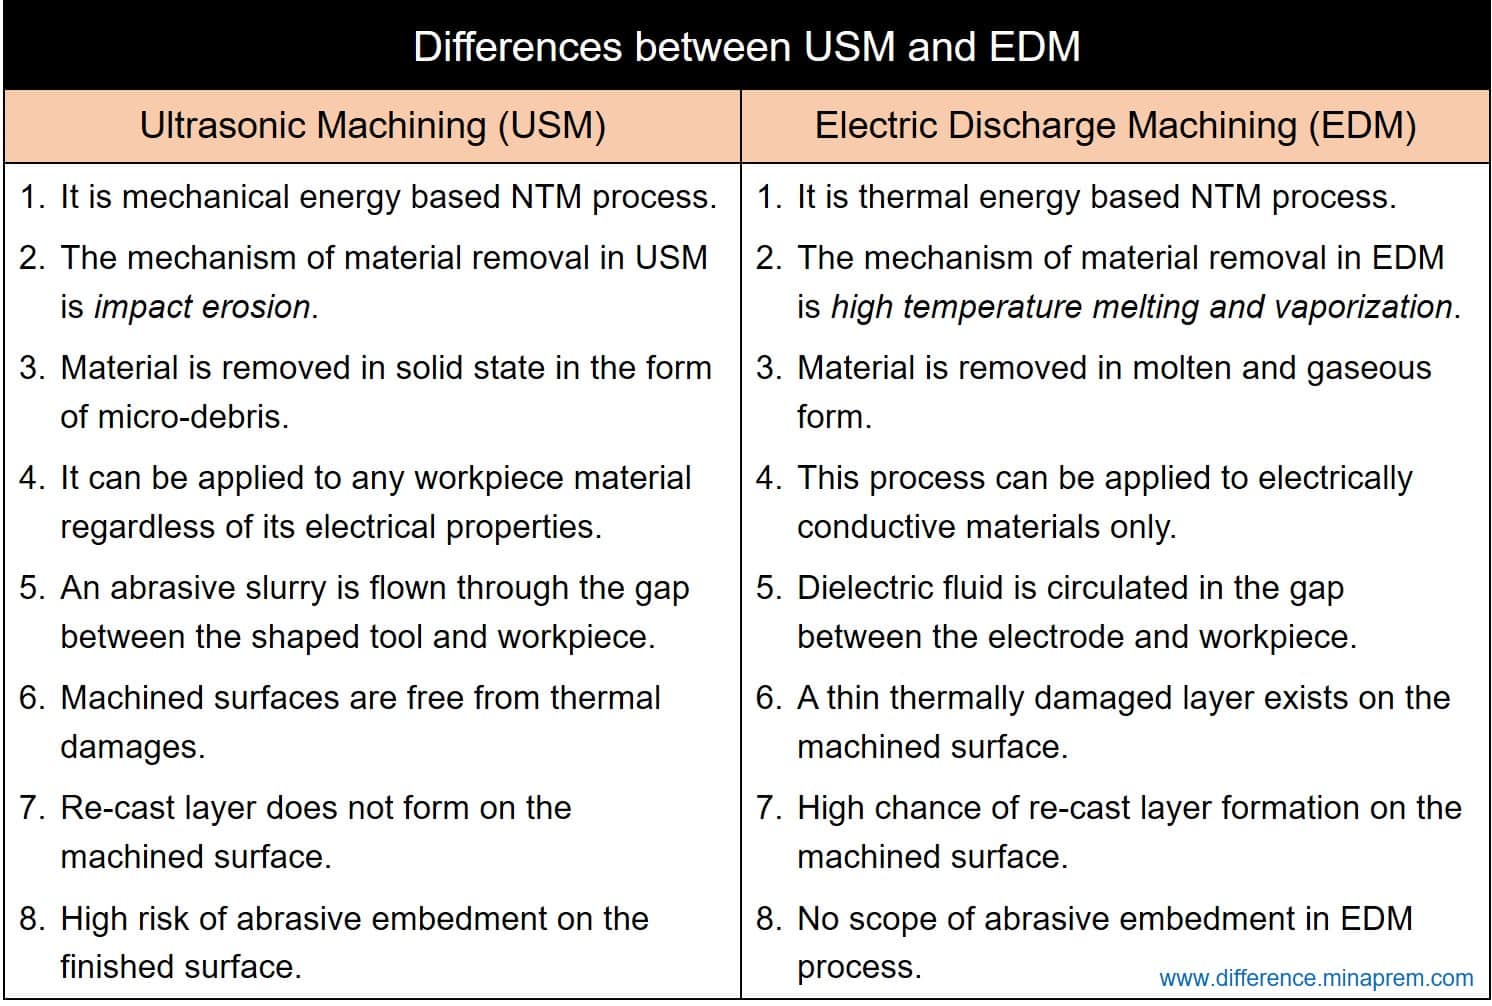 Differences between USM and EDM